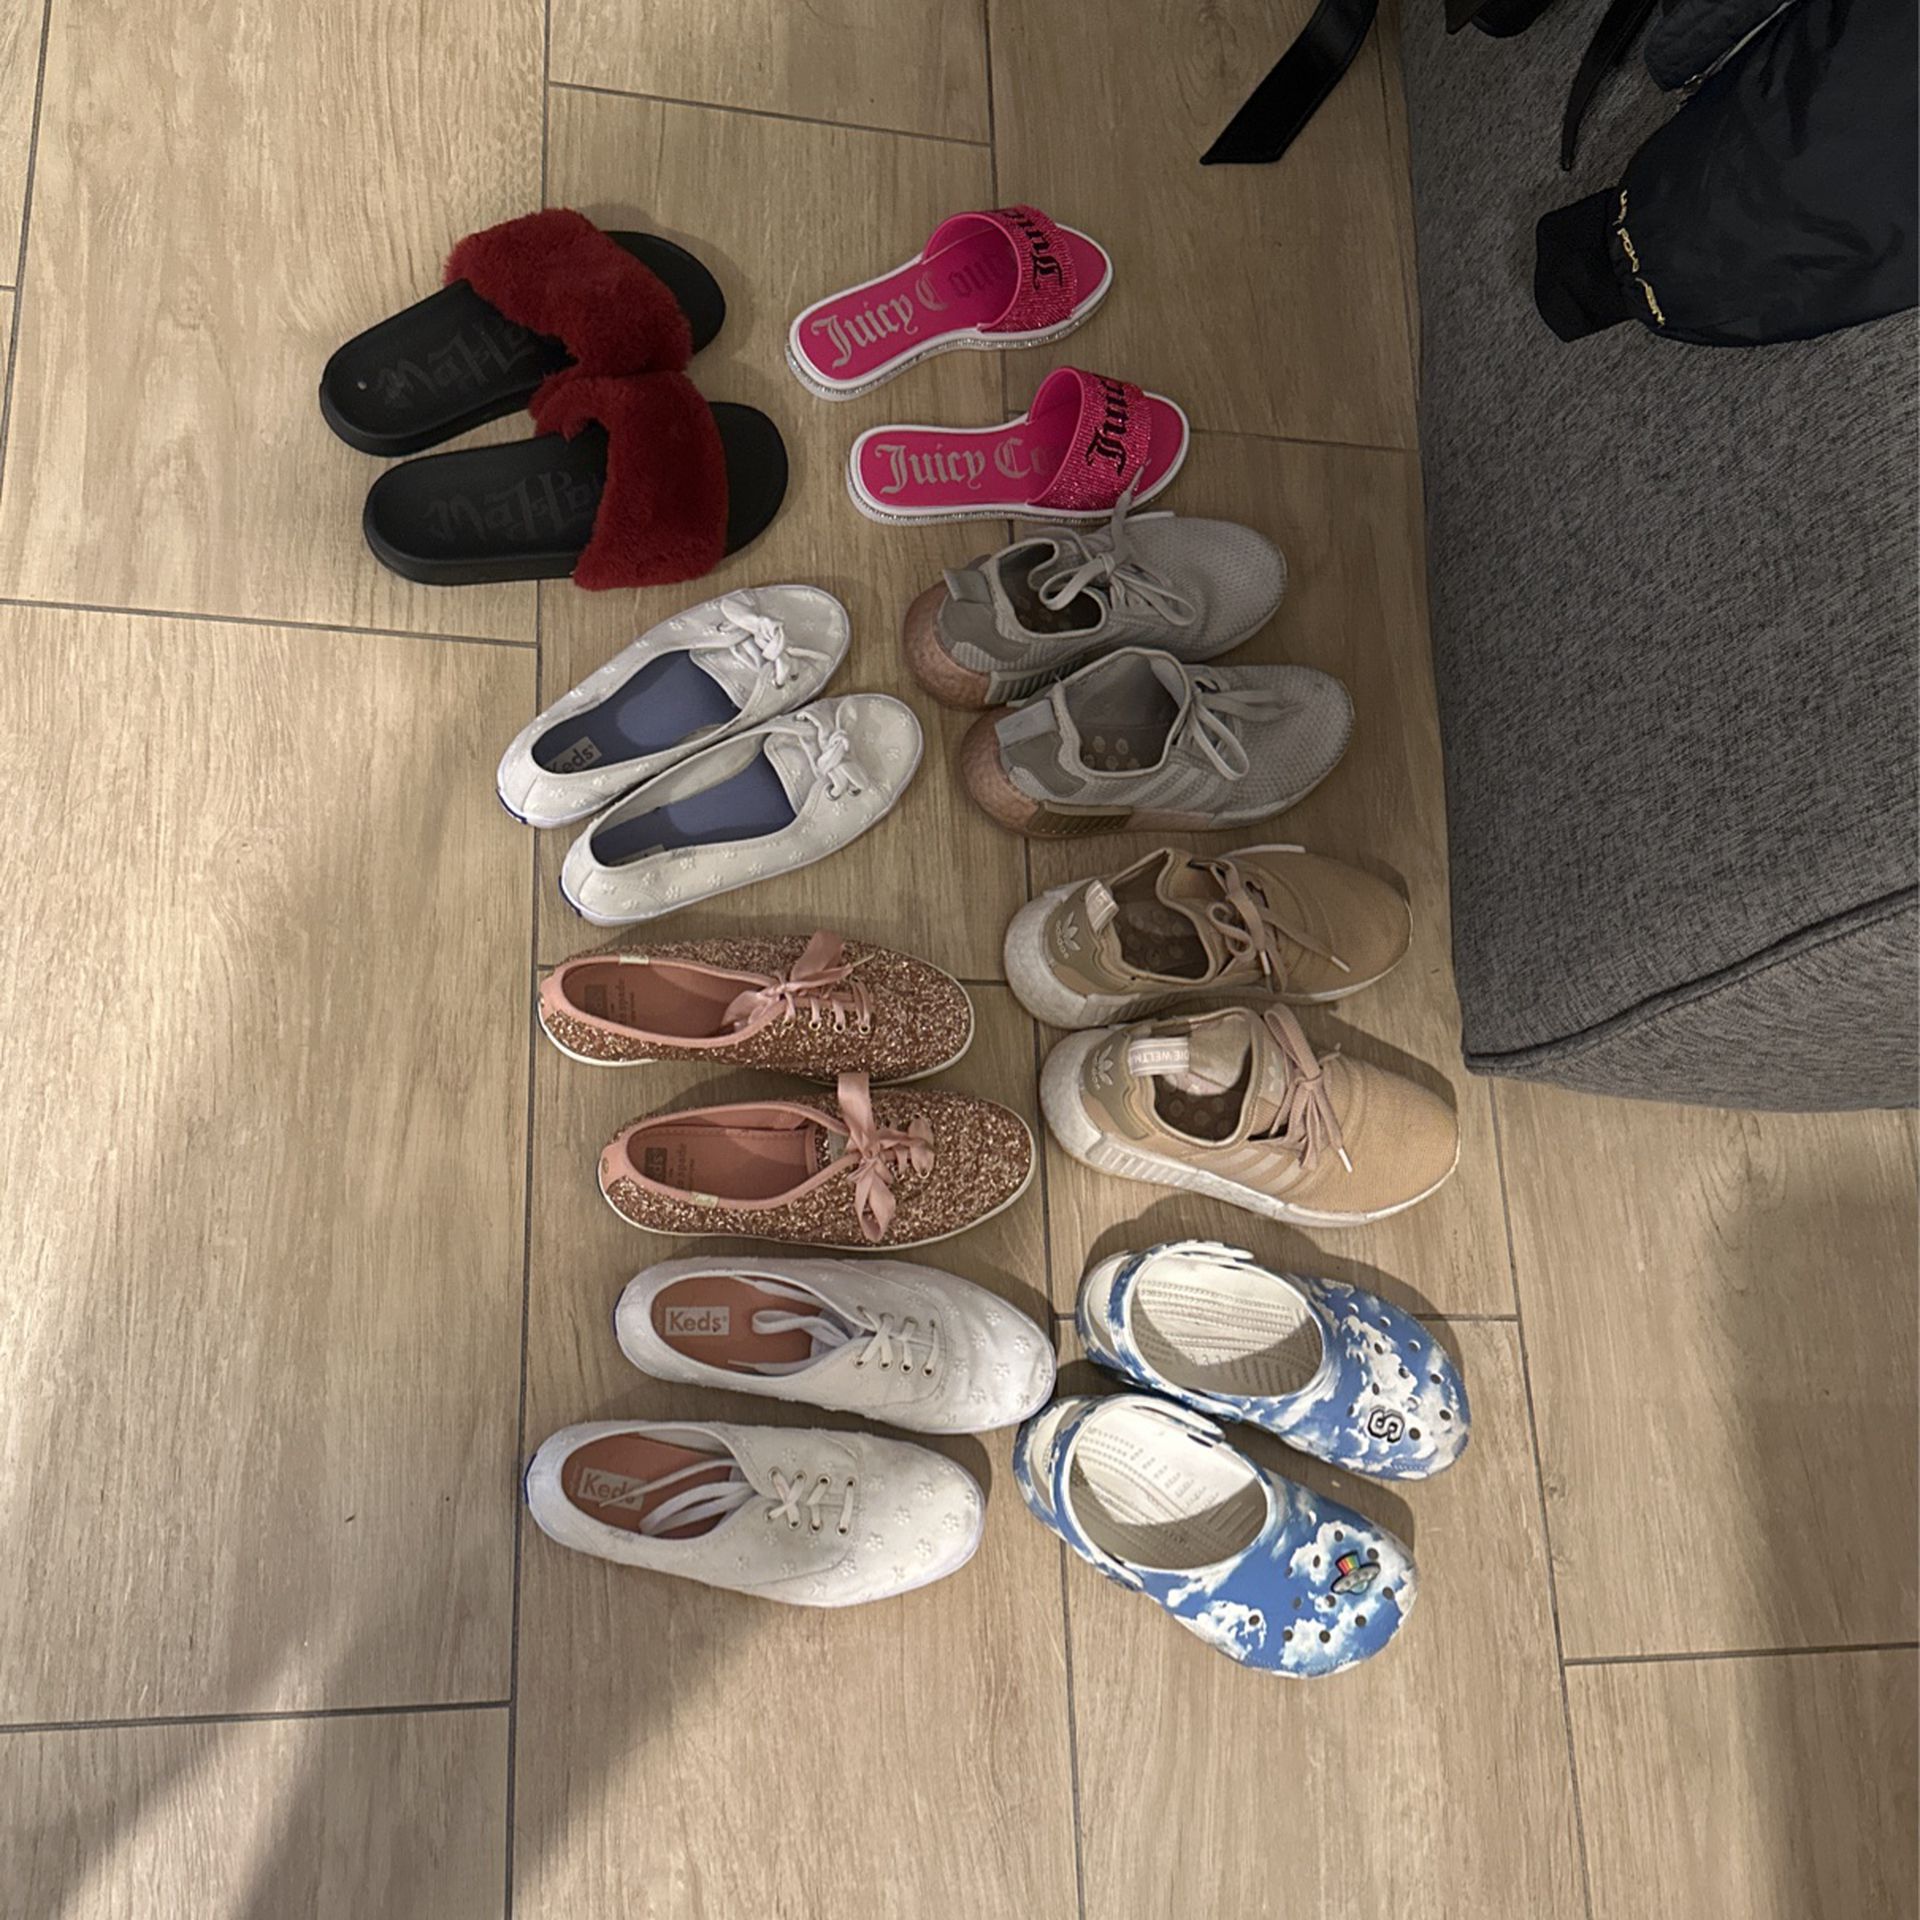 Shoes Kate Spade, Juicy Couture, Adidas, Keds, Crocs for Sale in Miami ...